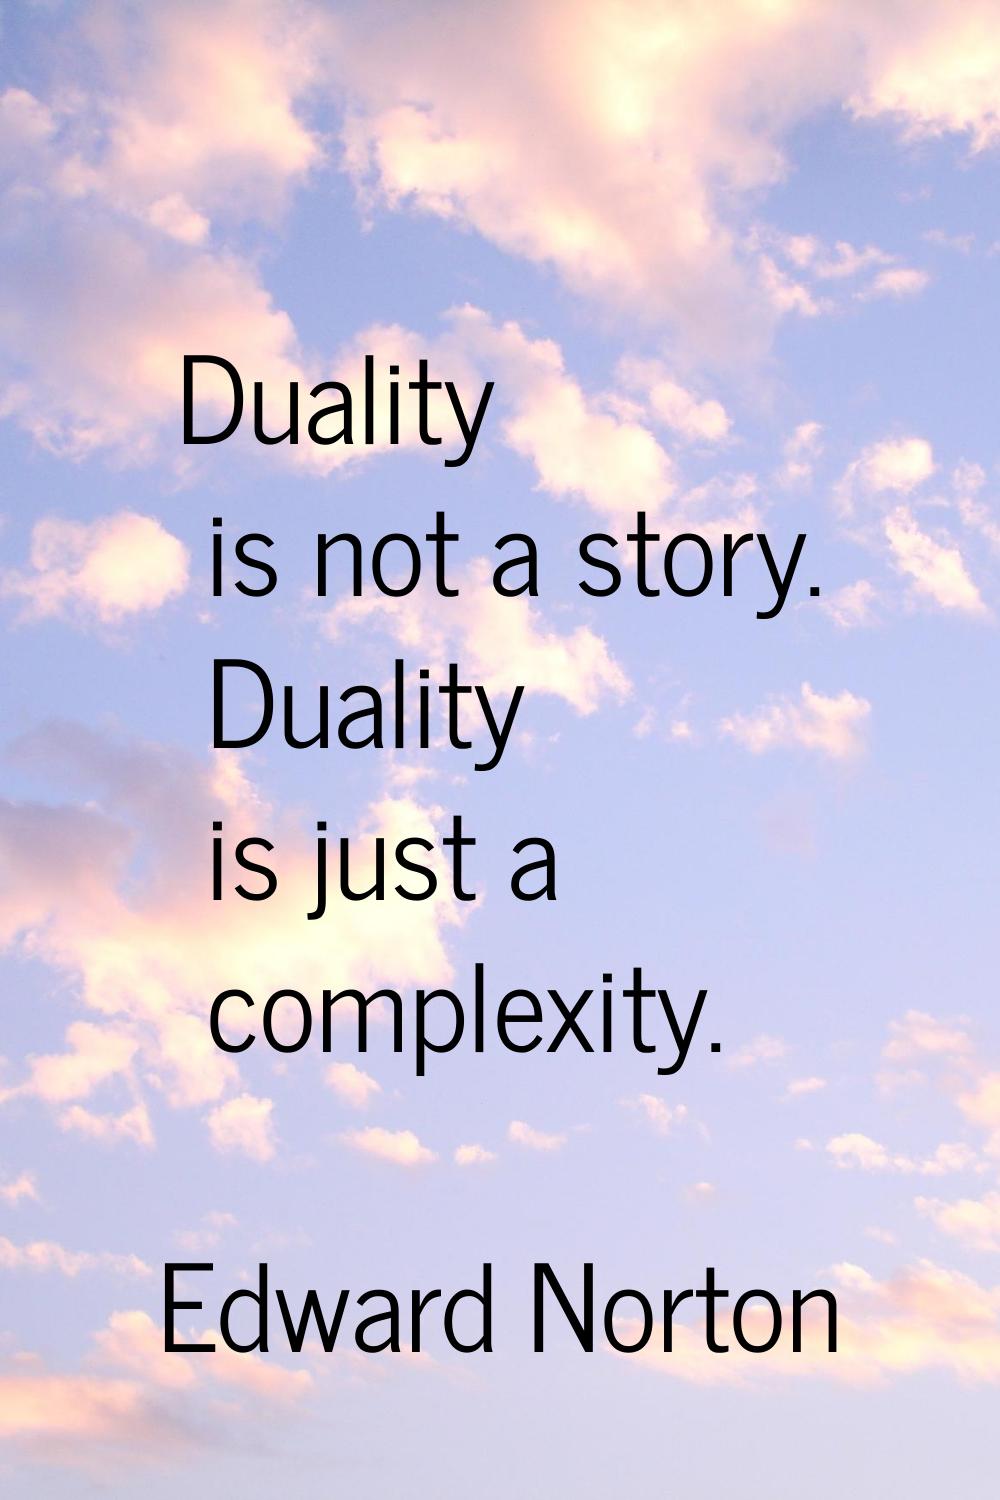 Duality is not a story. Duality is just a complexity.